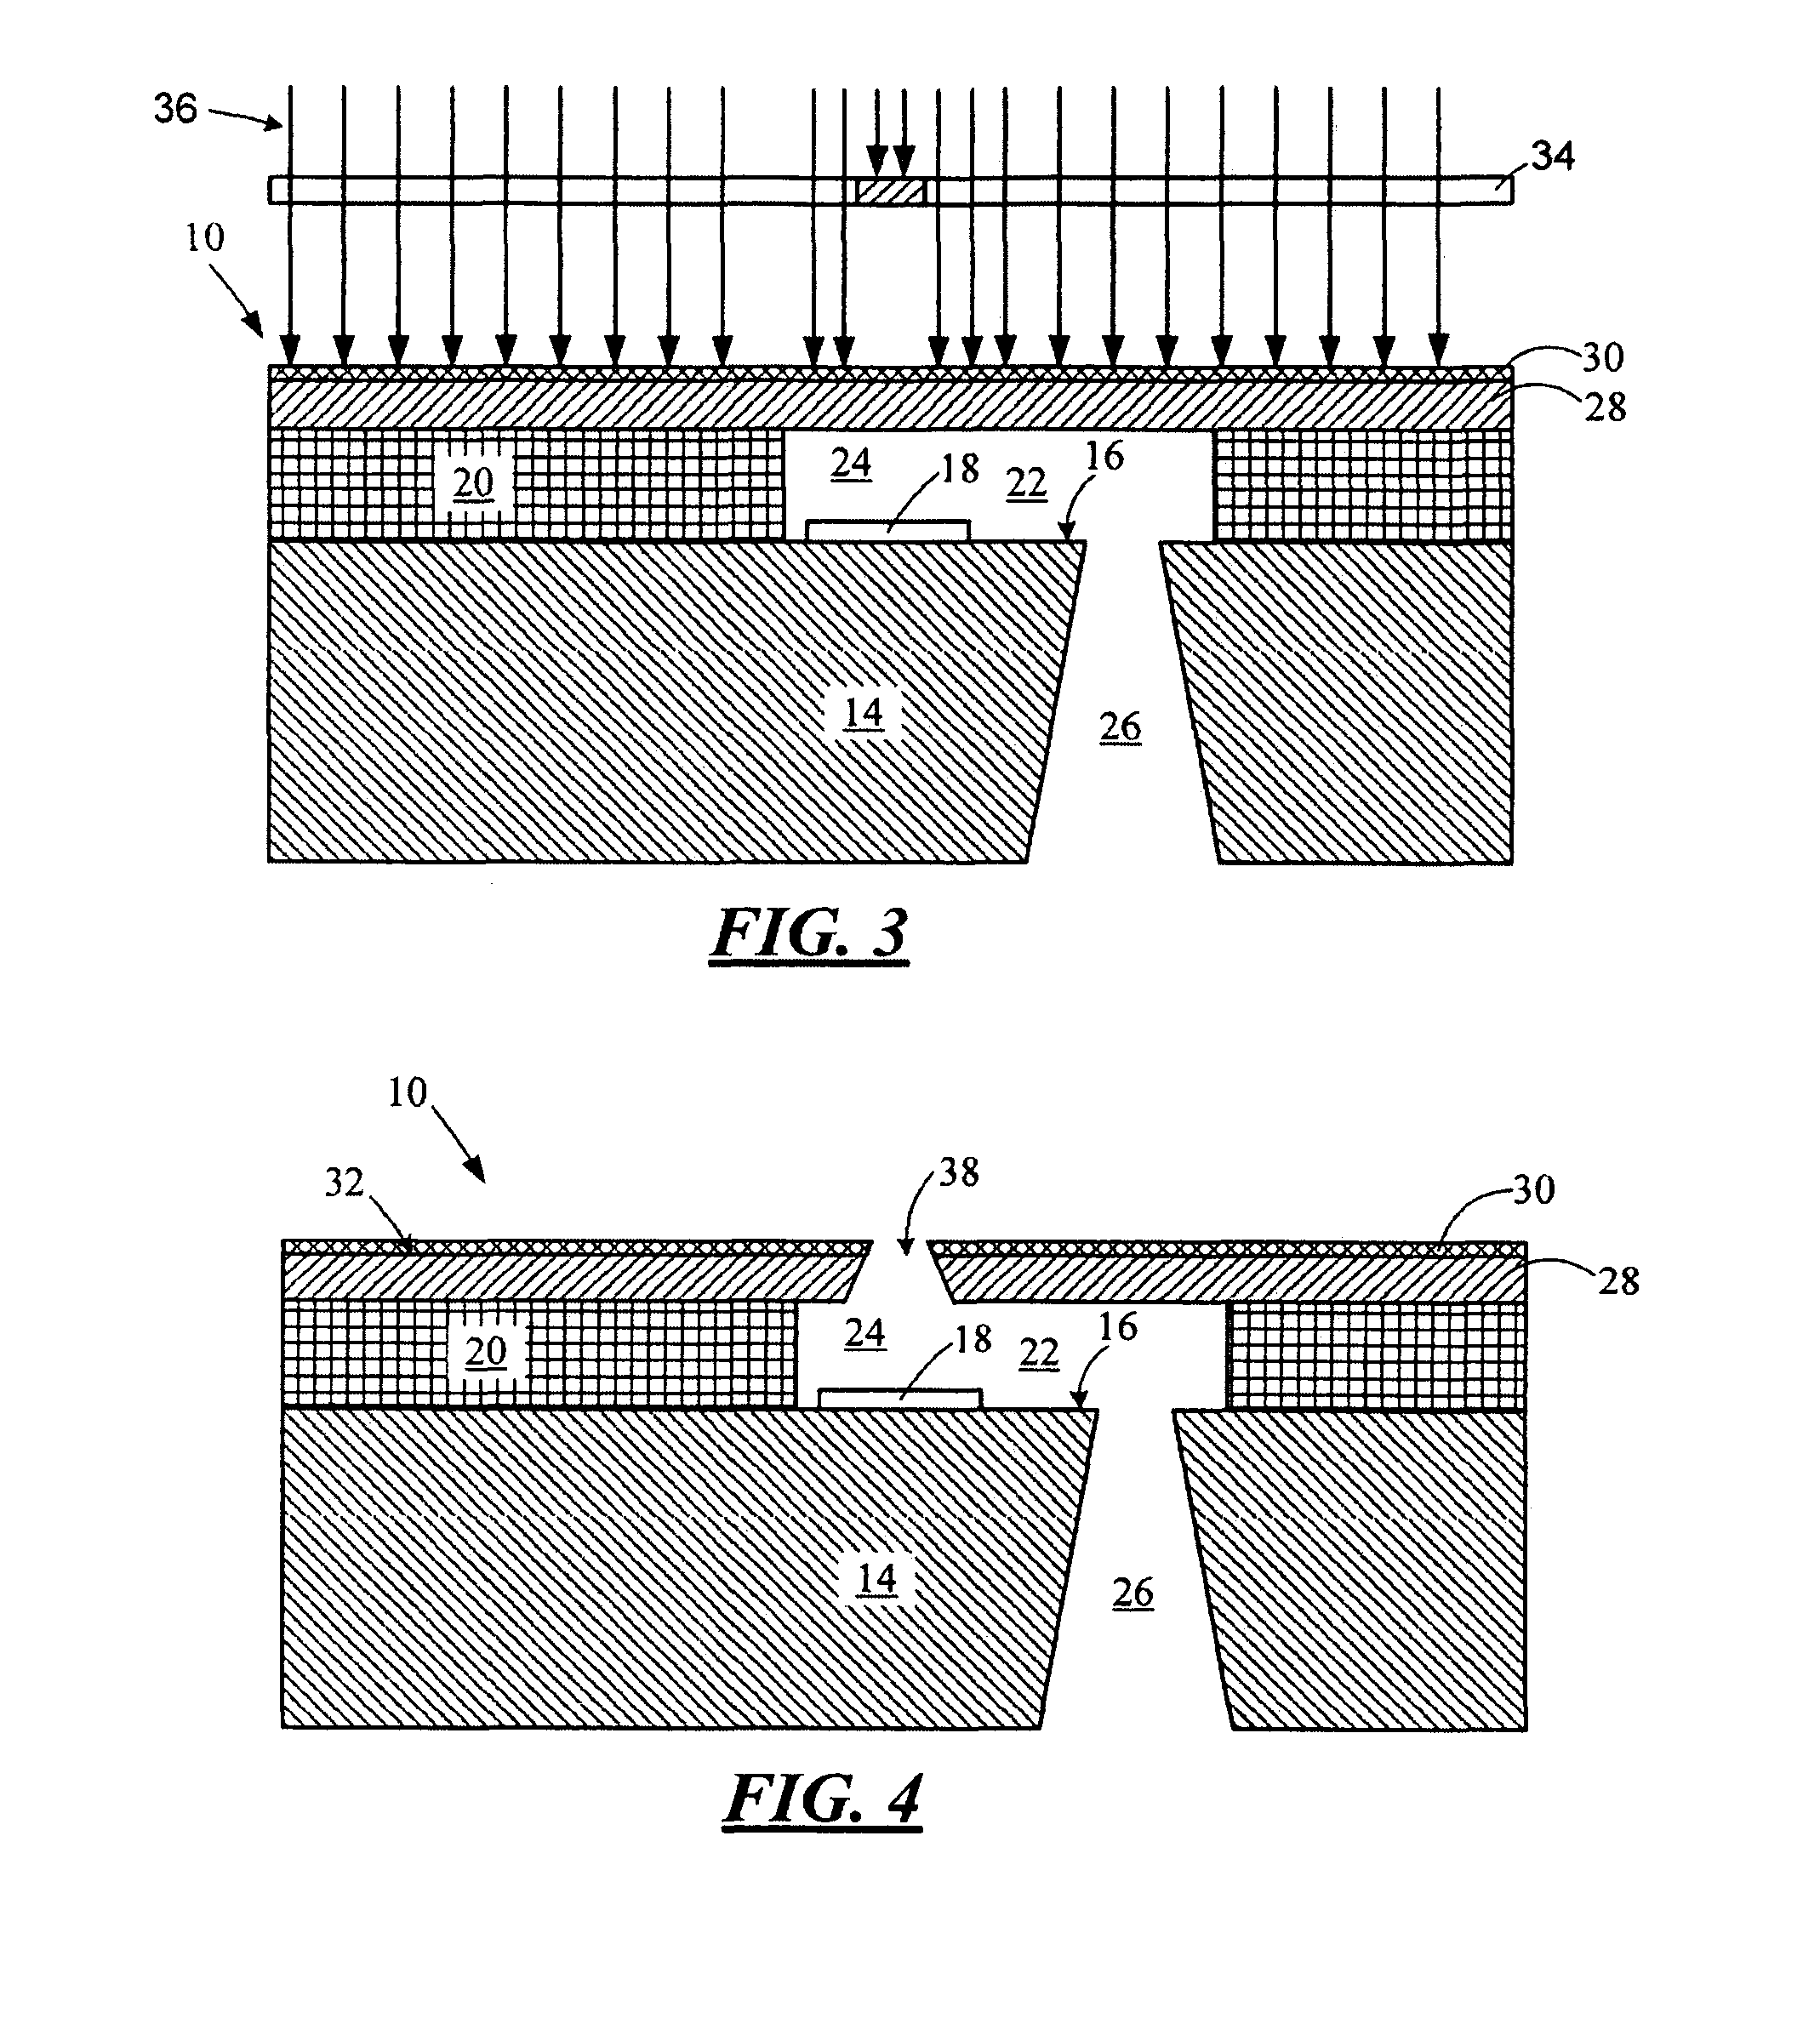 Hydrophobic nozzle plate structures for micro-fluid ejection heads